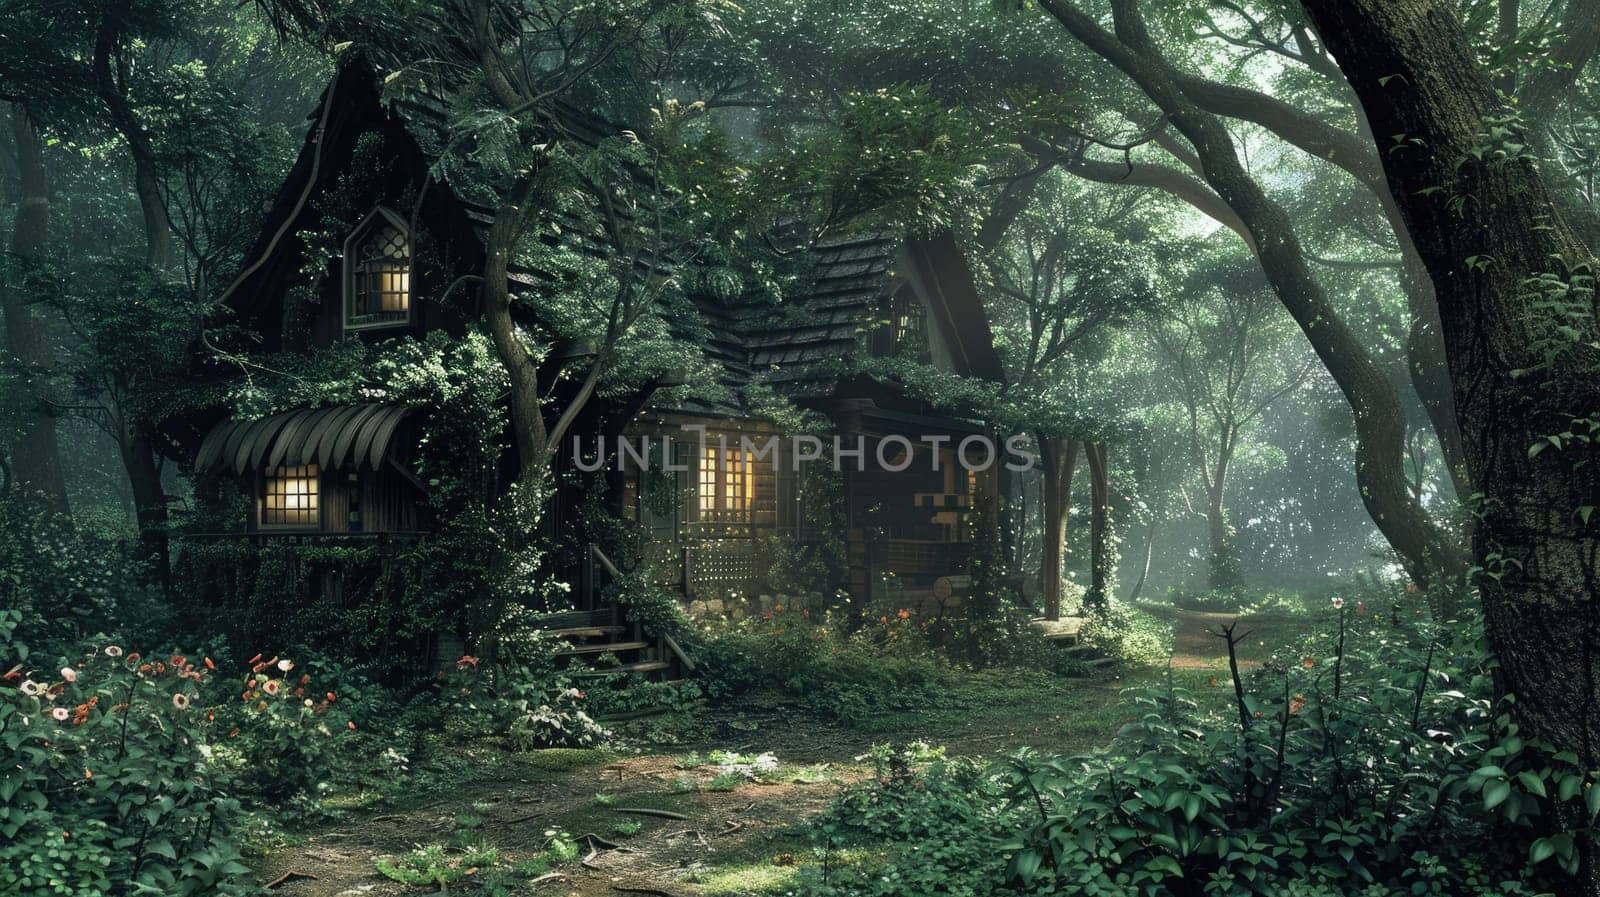 Fantasy hut in greenery hiding in the forest AI